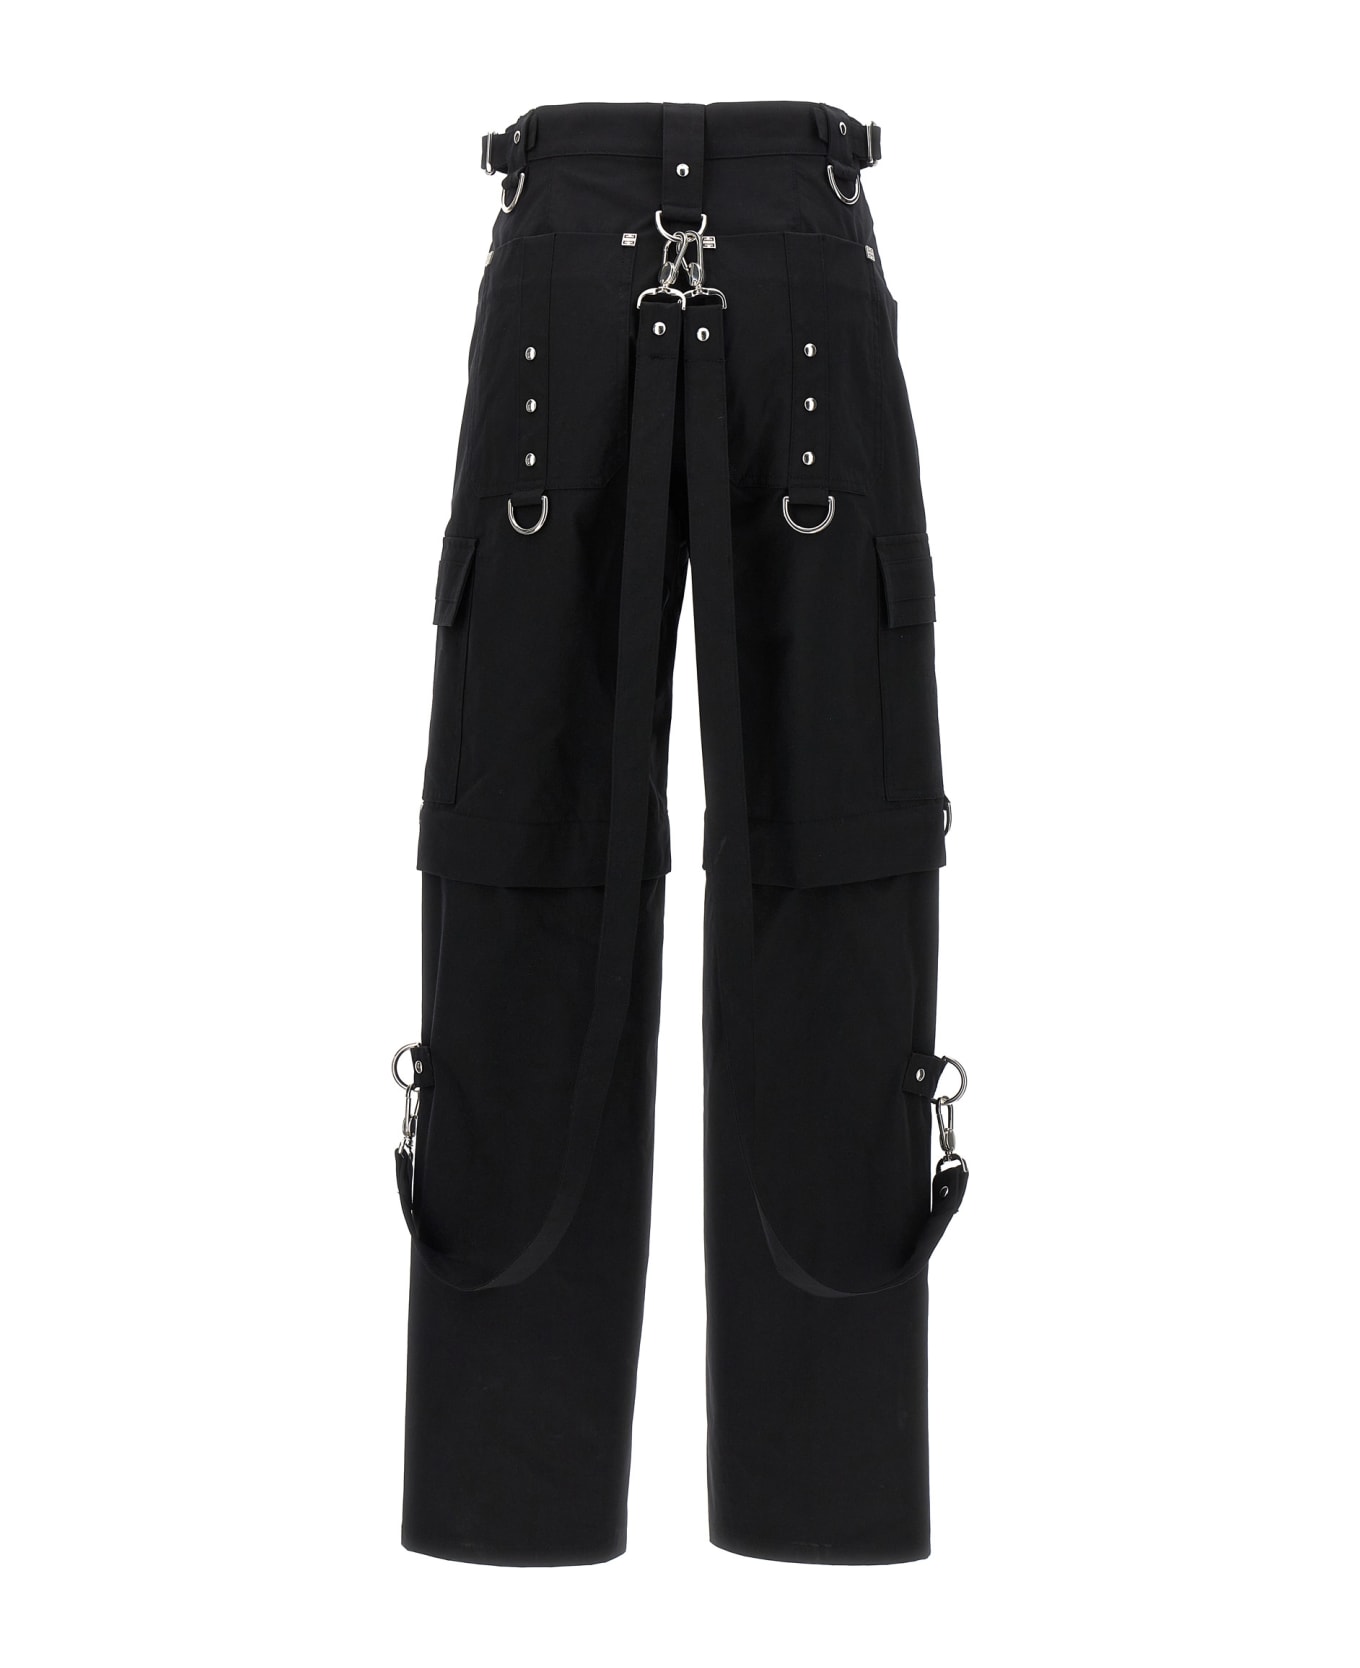 Givenchy Two In One Detachable Cargo Pants With Suspenders - black ボトムス